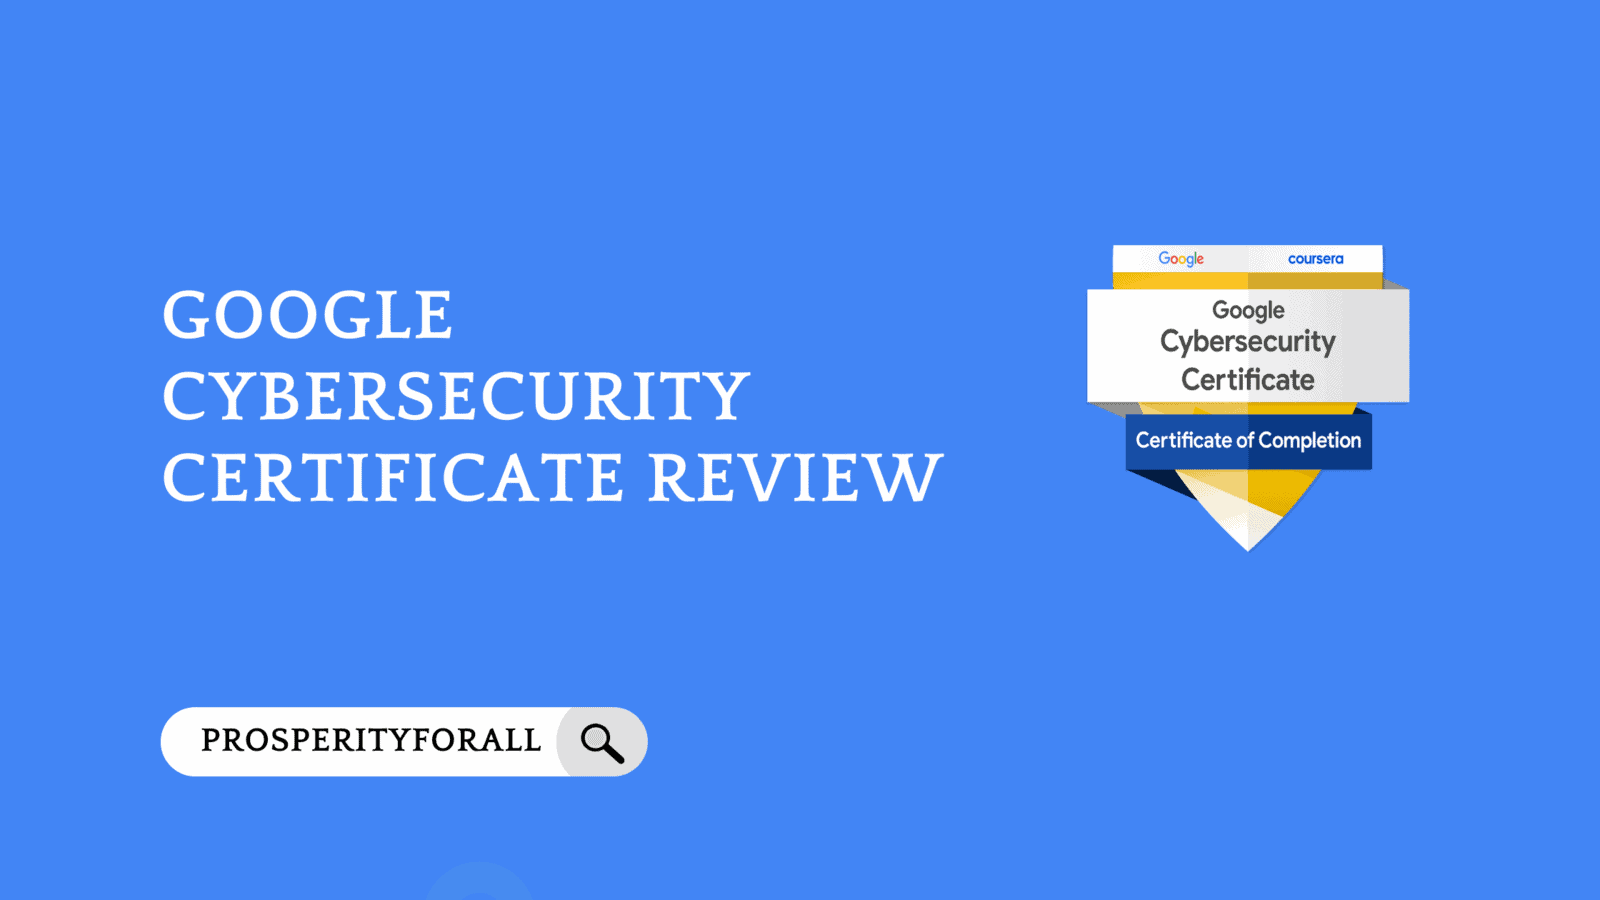 Google Cybersecurity Certificate Review - ProsperityForAll